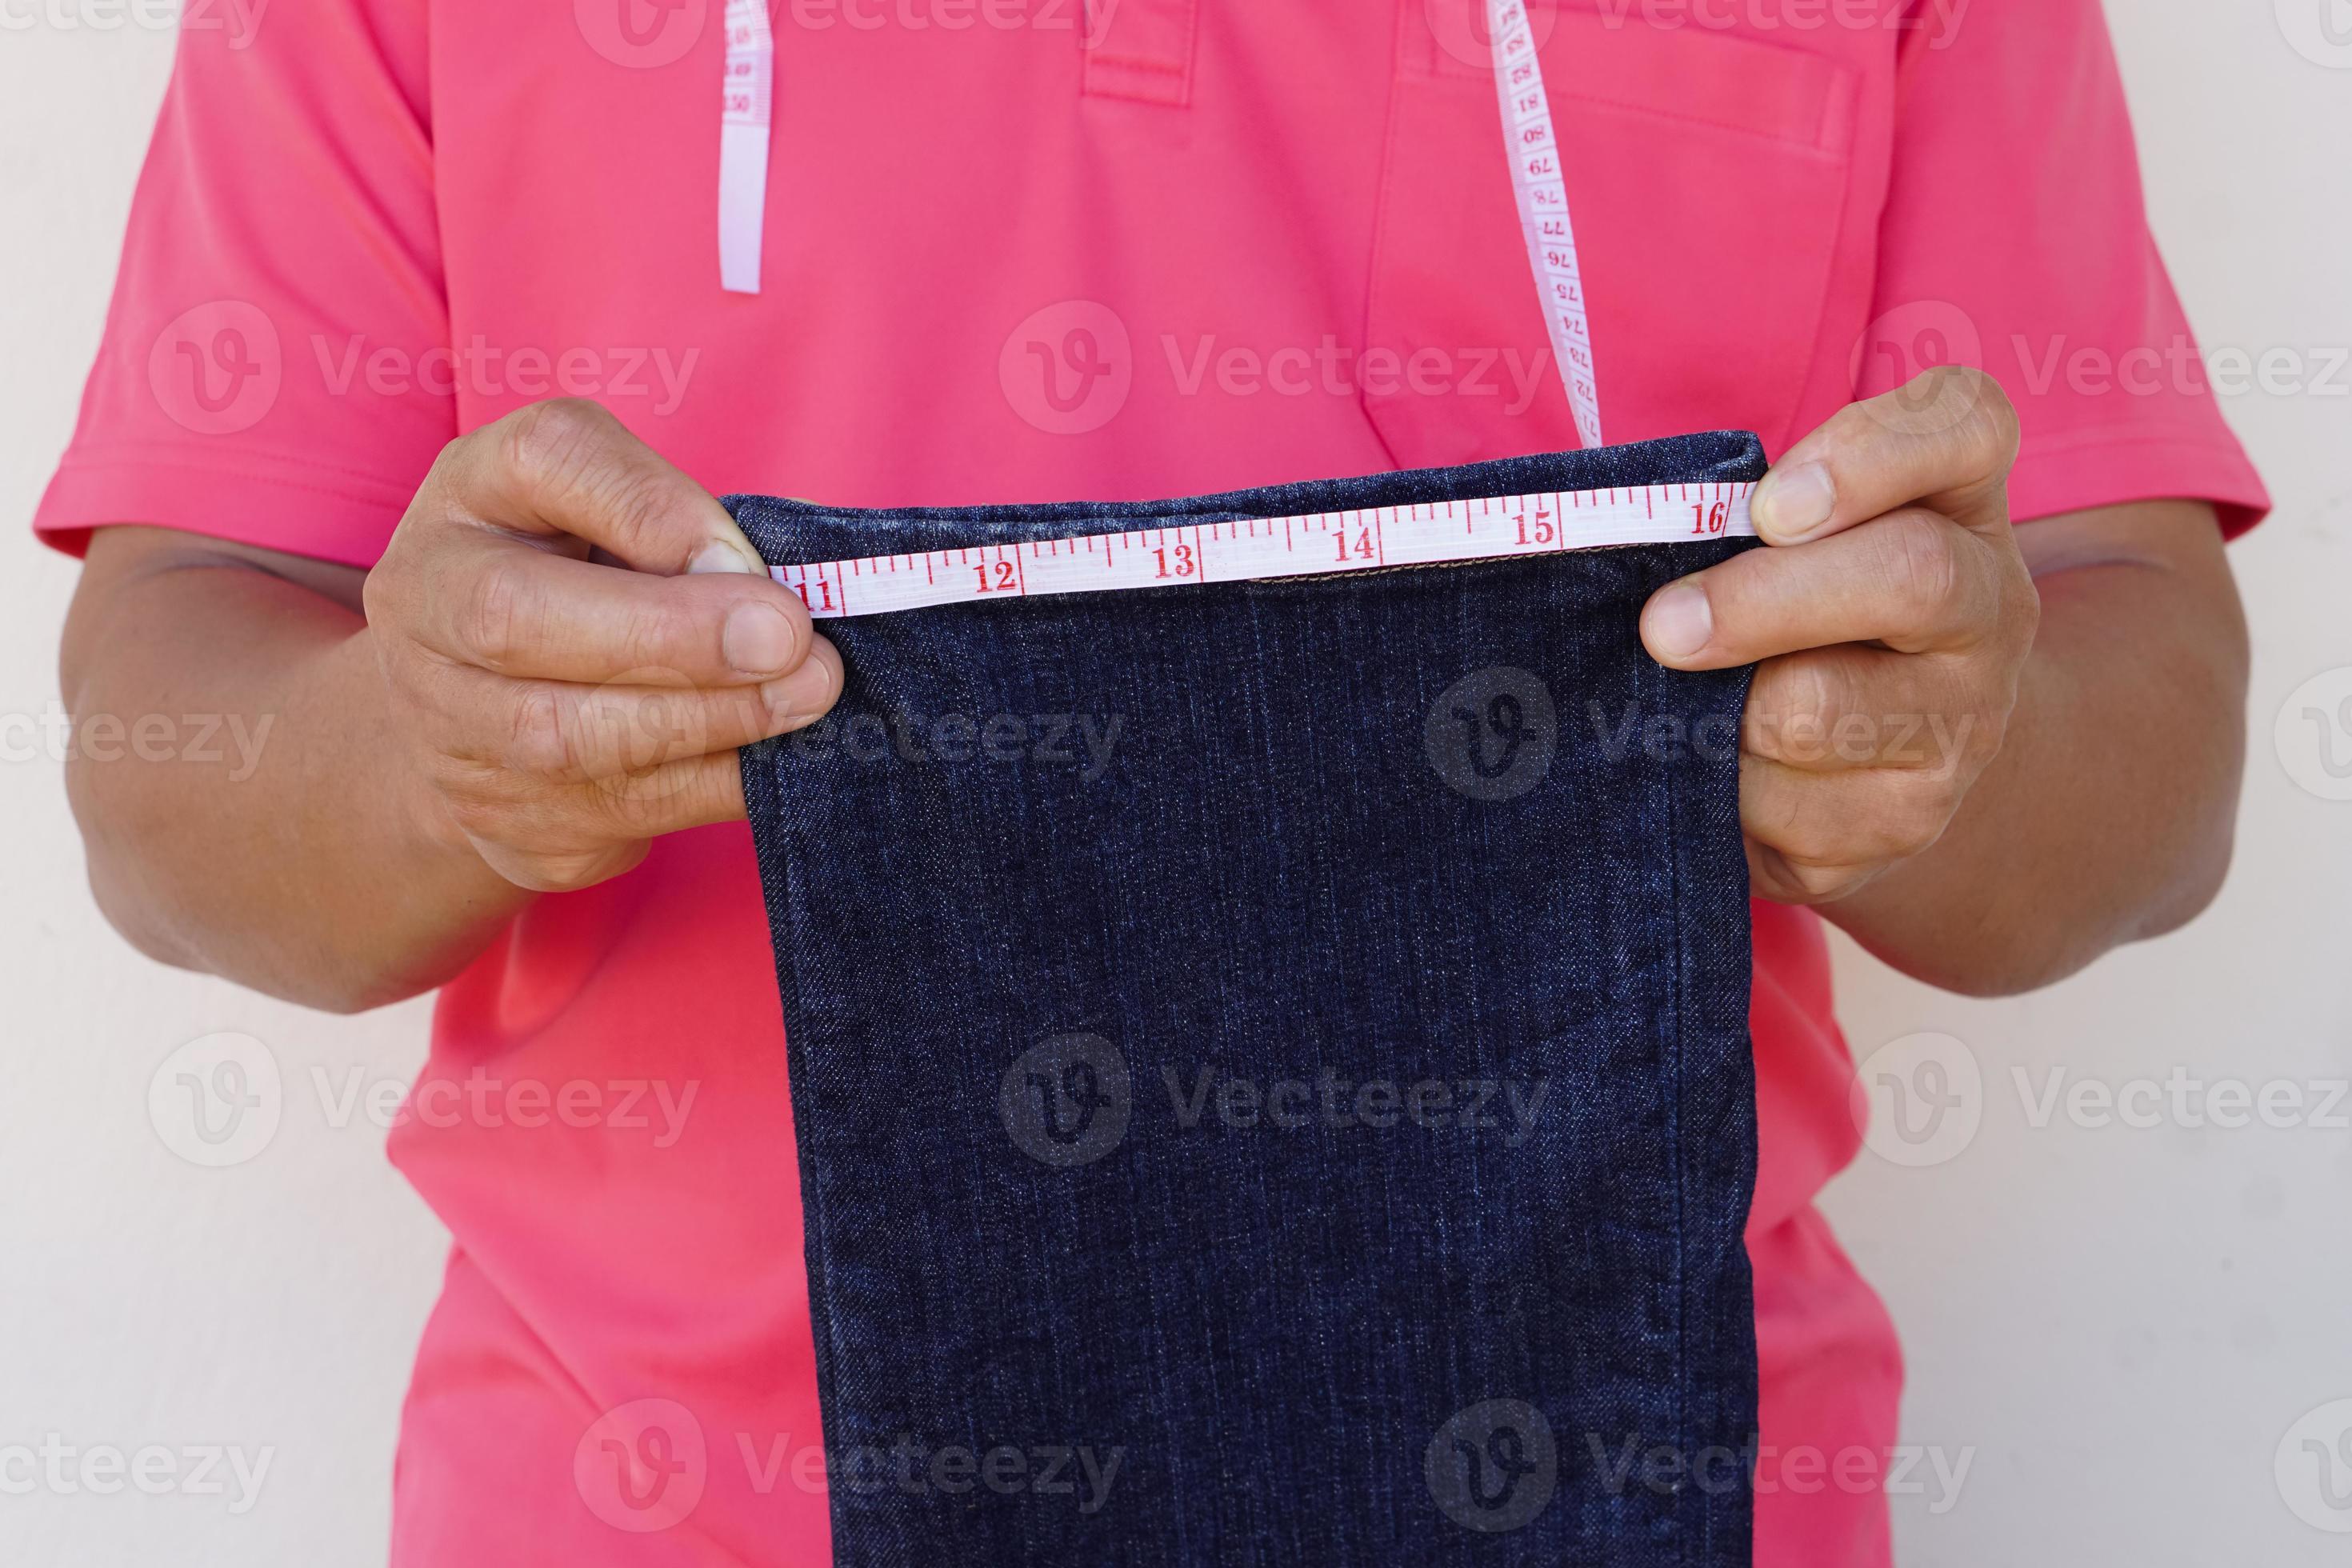 https://static.vecteezy.com/system/resources/previews/017/026/253/large_2x/closeup-tailor-uses-measuring-tape-to-measure-width-of-jeans-leg-concept-diy-sewing-handcraft-tailor-repair-clothing-at-home-check-size-prepare-to-cut-shorten-the-jeans-photo.JPG